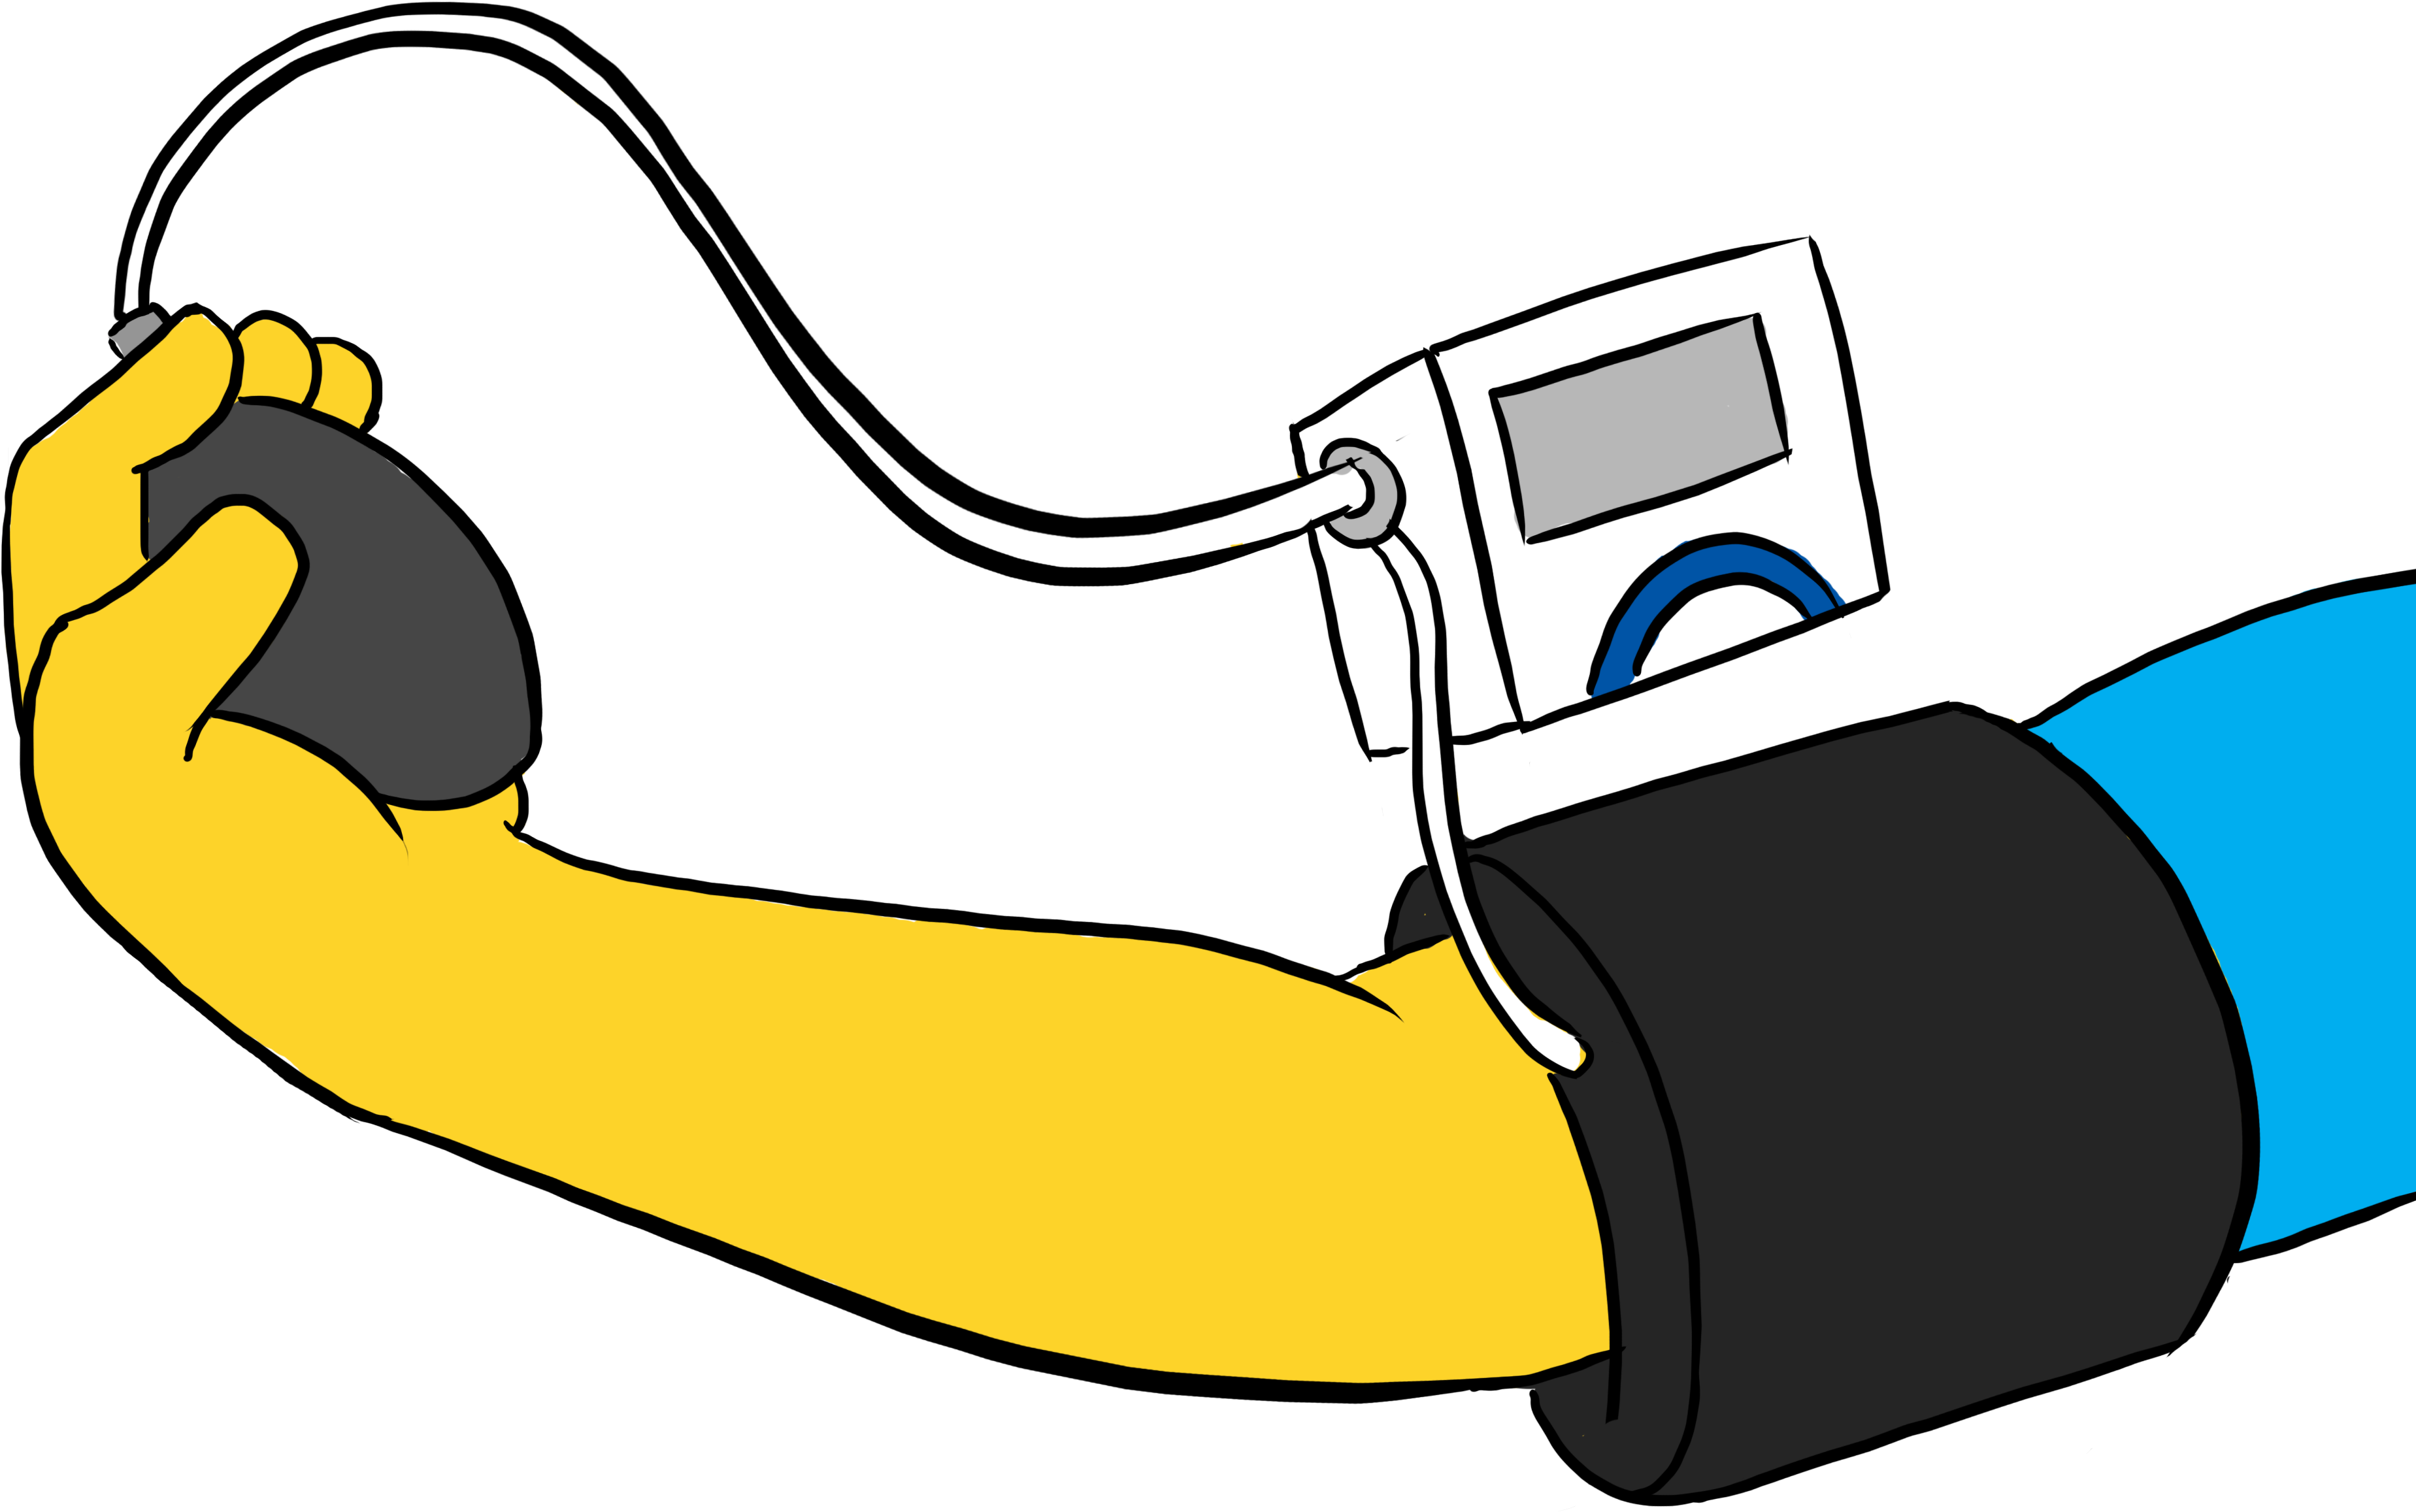 A Cartoon Of A Banana With A Device Attached To It